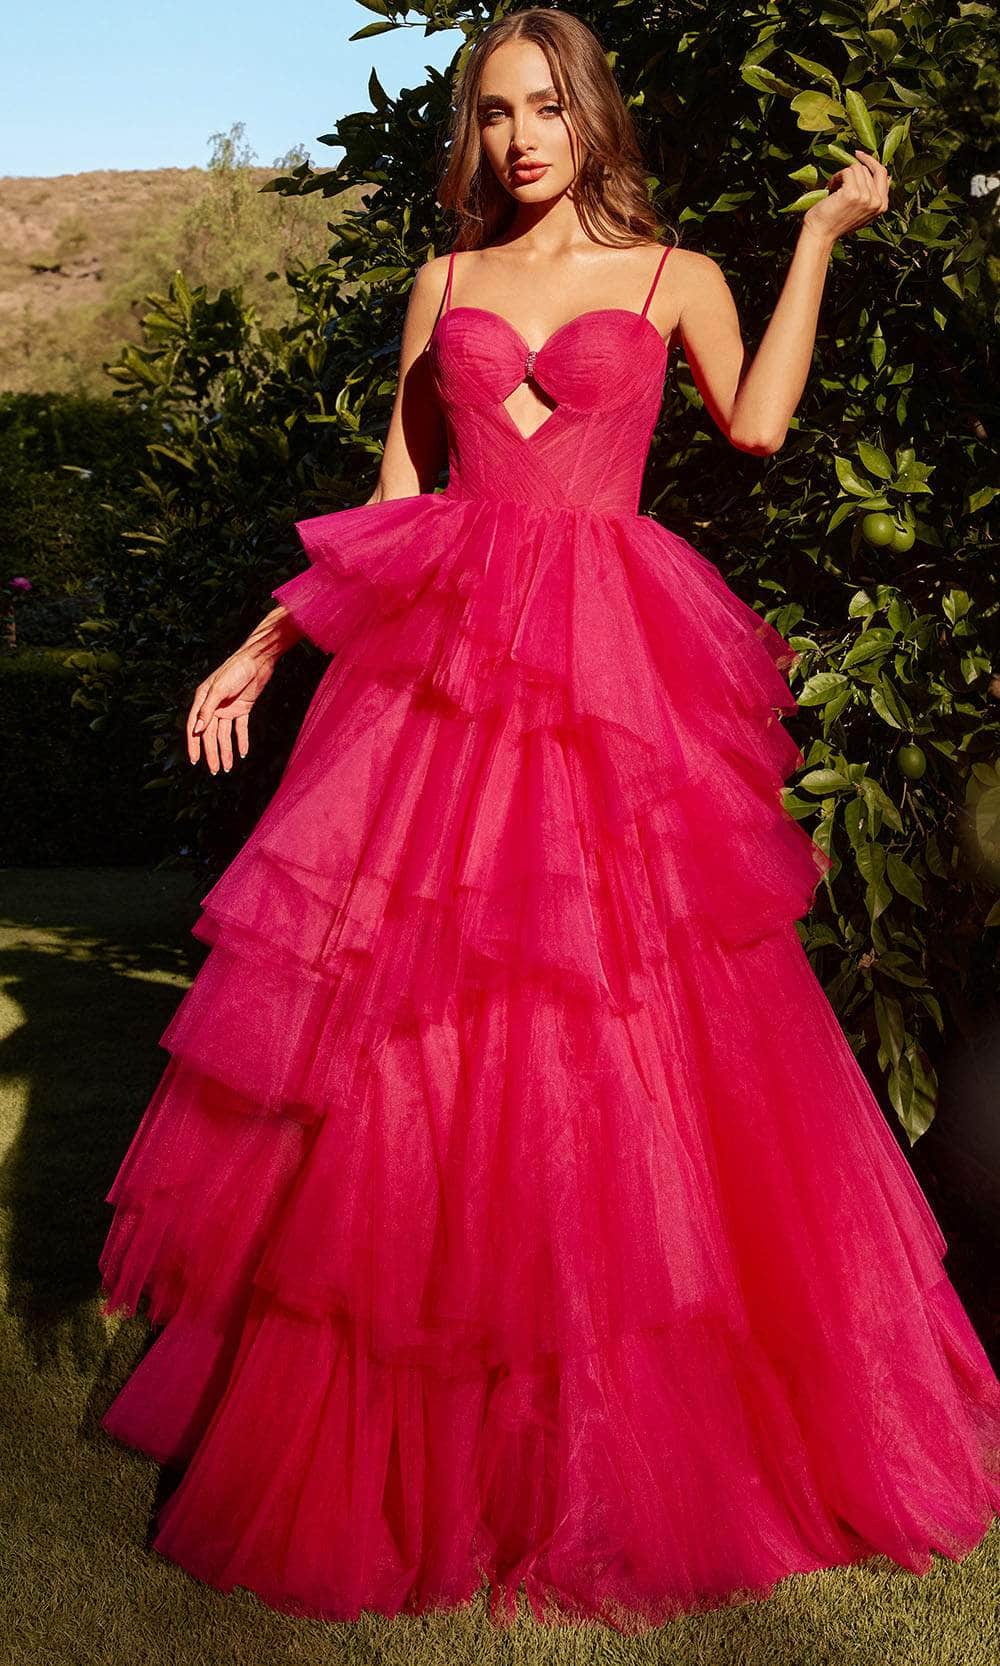 Andrea And Leo A1238 - Asymmetrical Tiered Gown 2 / Azalea Pink